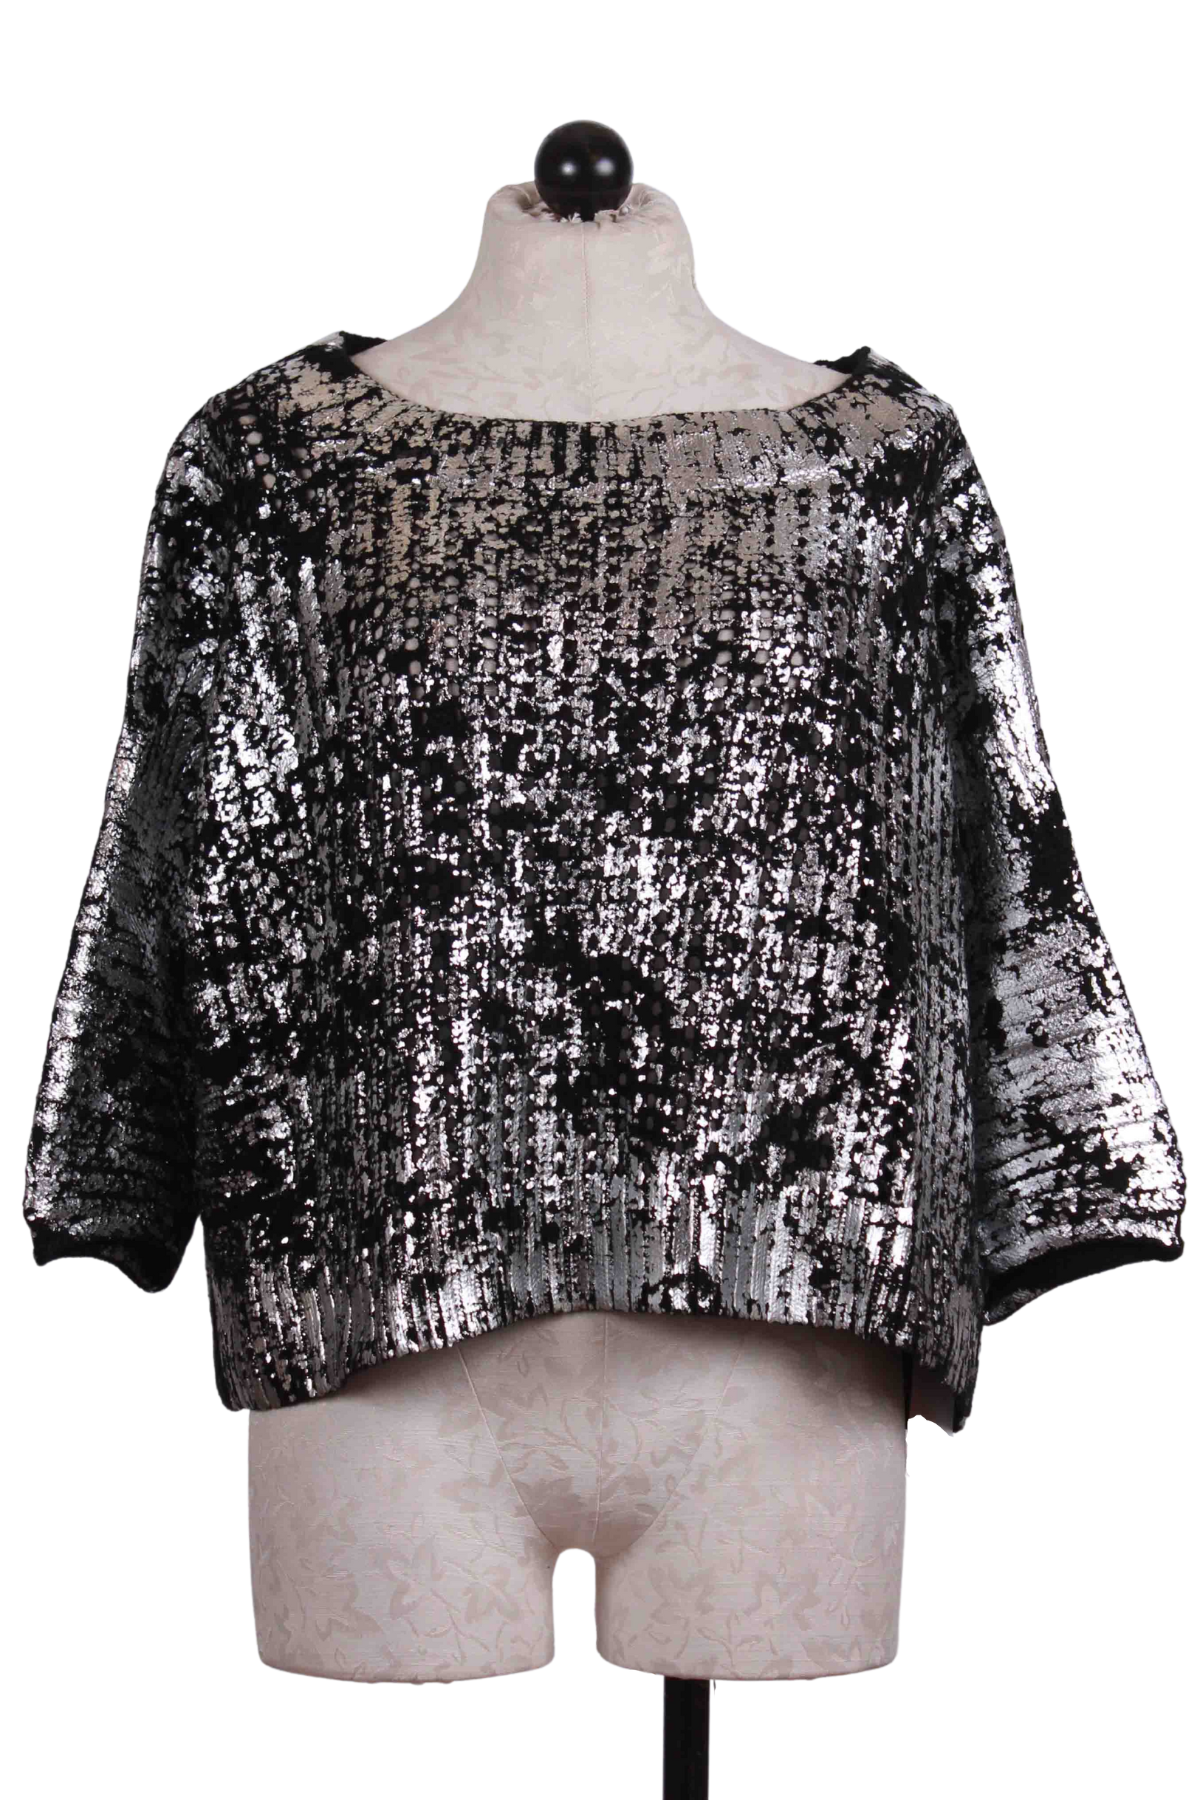 Black and Silver Metallic Crochet Sweater by Planet